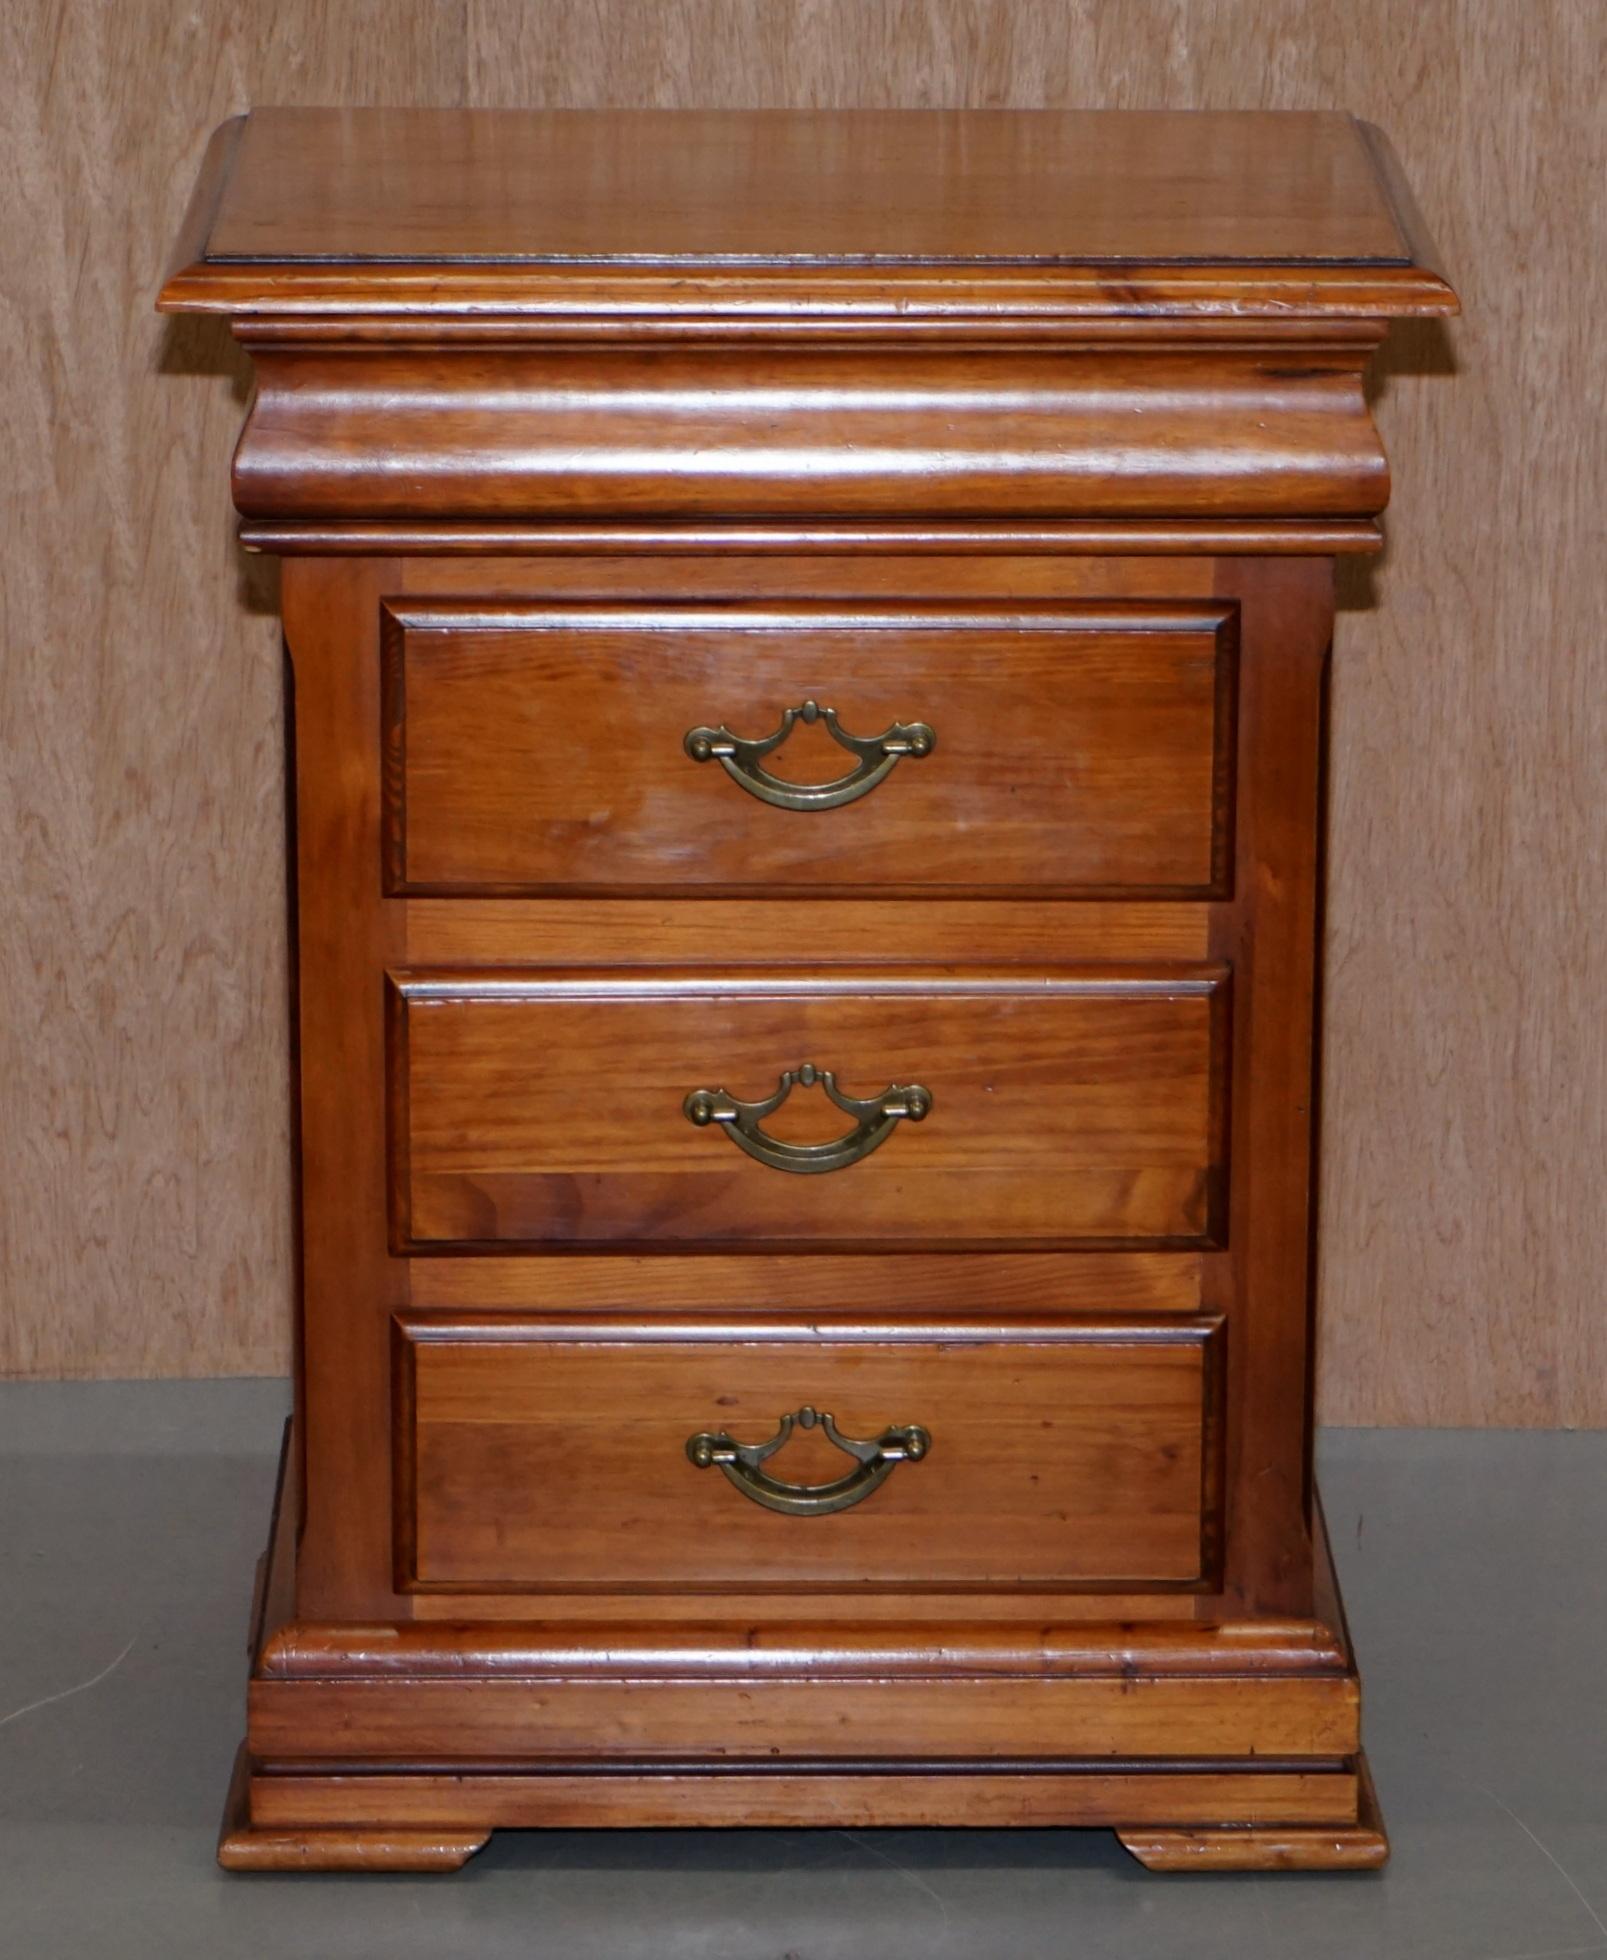 Pair of Bedside Table Drawers with Four Drawers Each, Cherry Color Wood 5